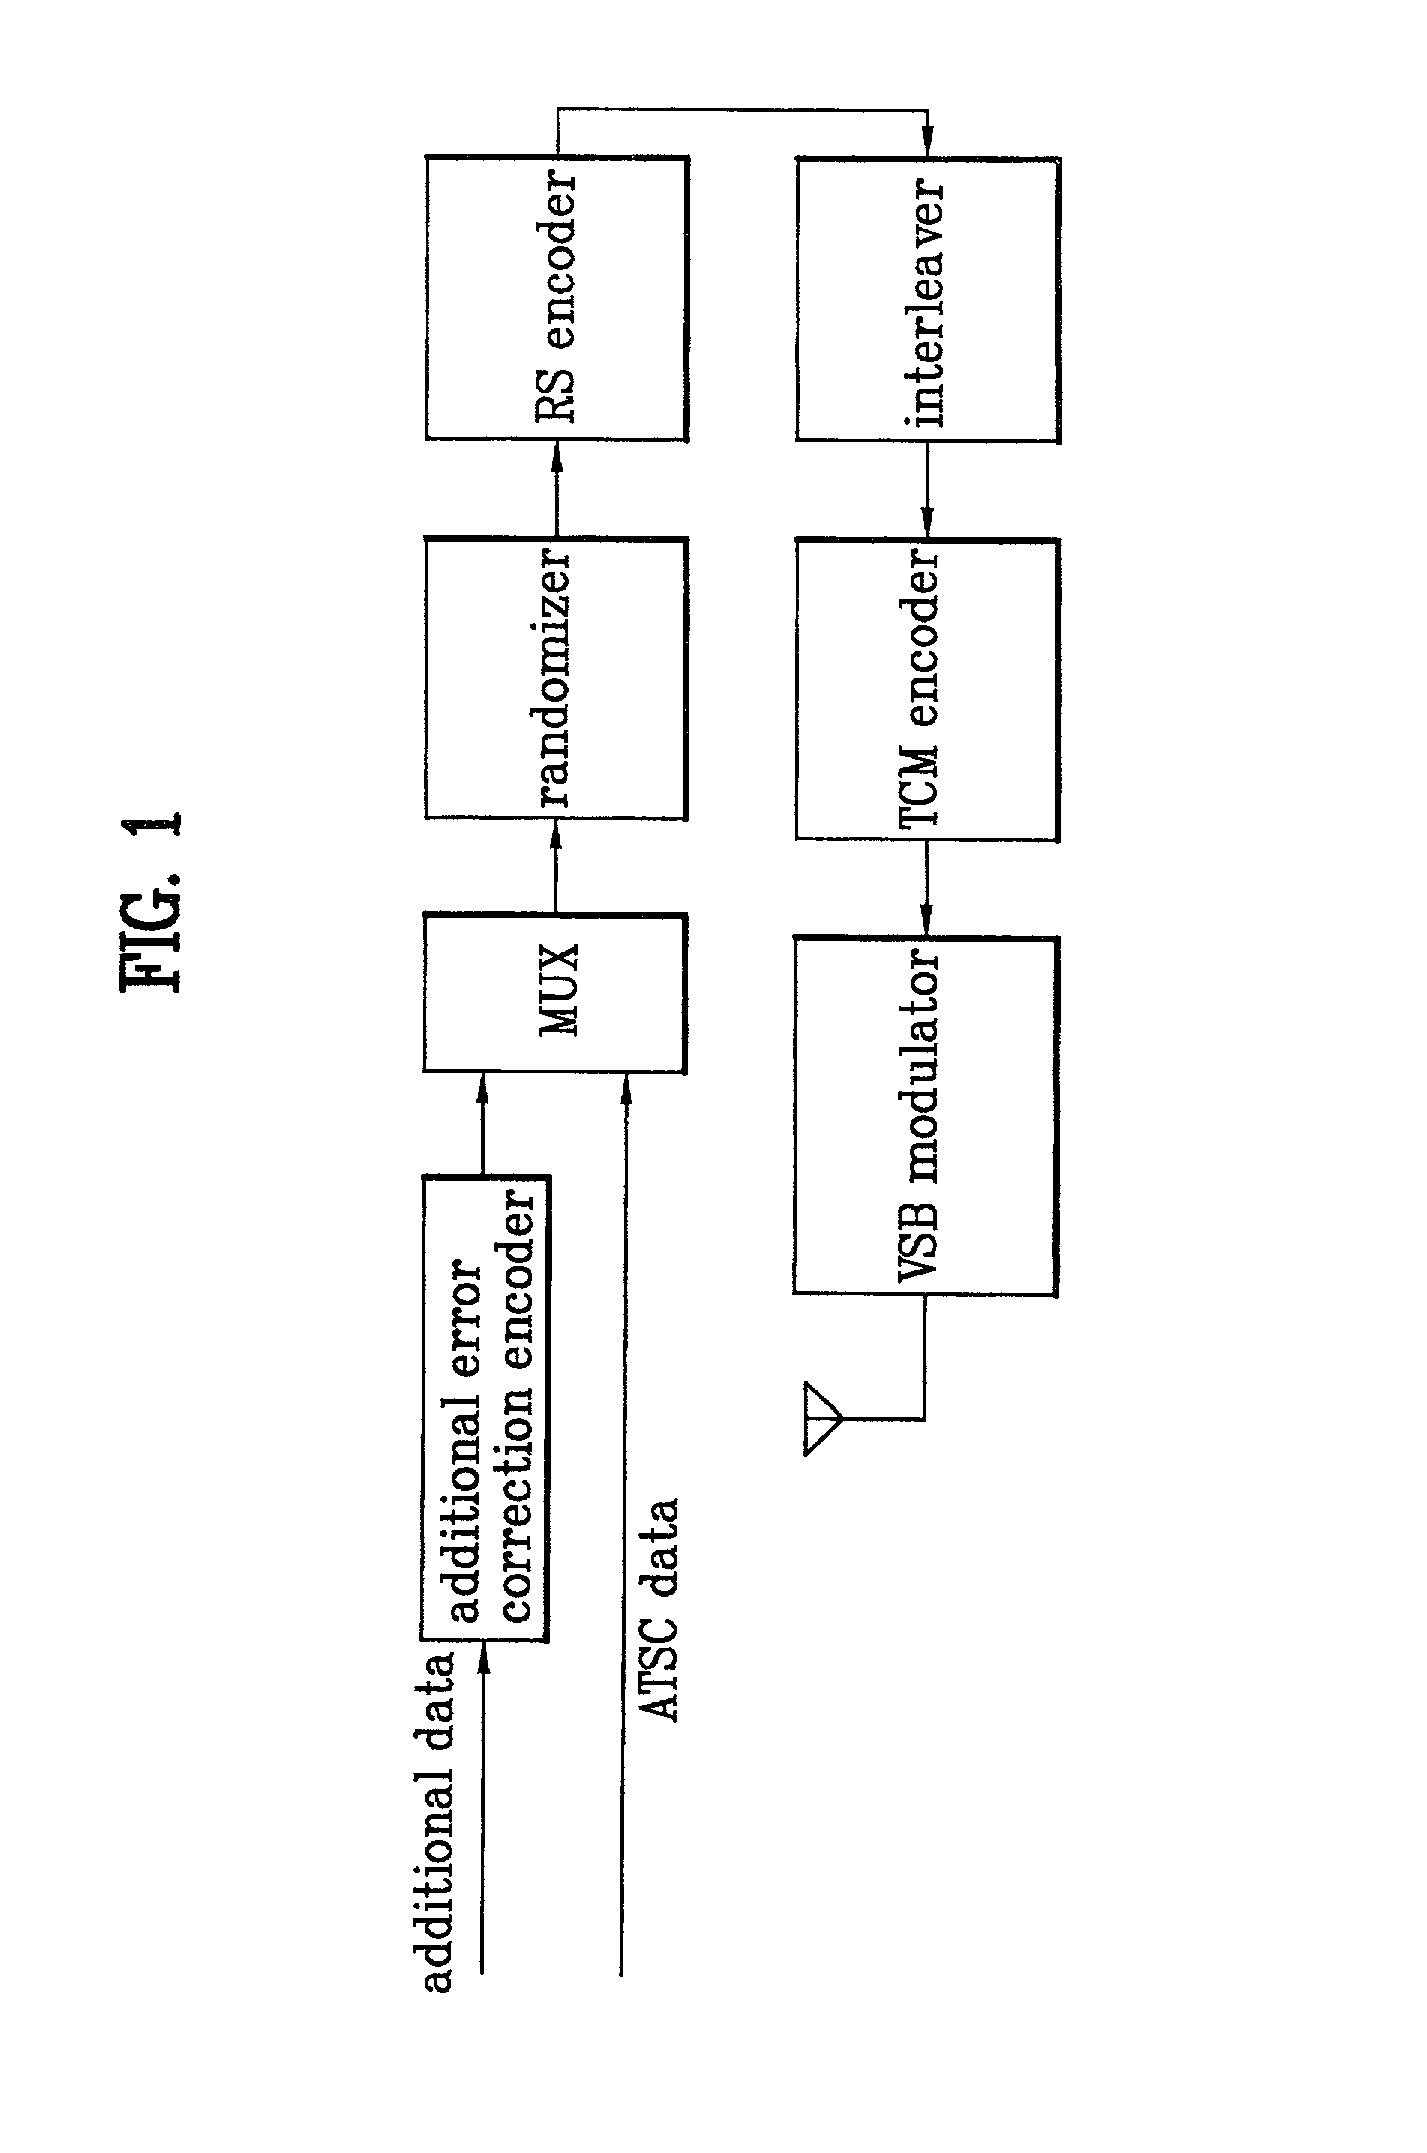 Communication system in digital television